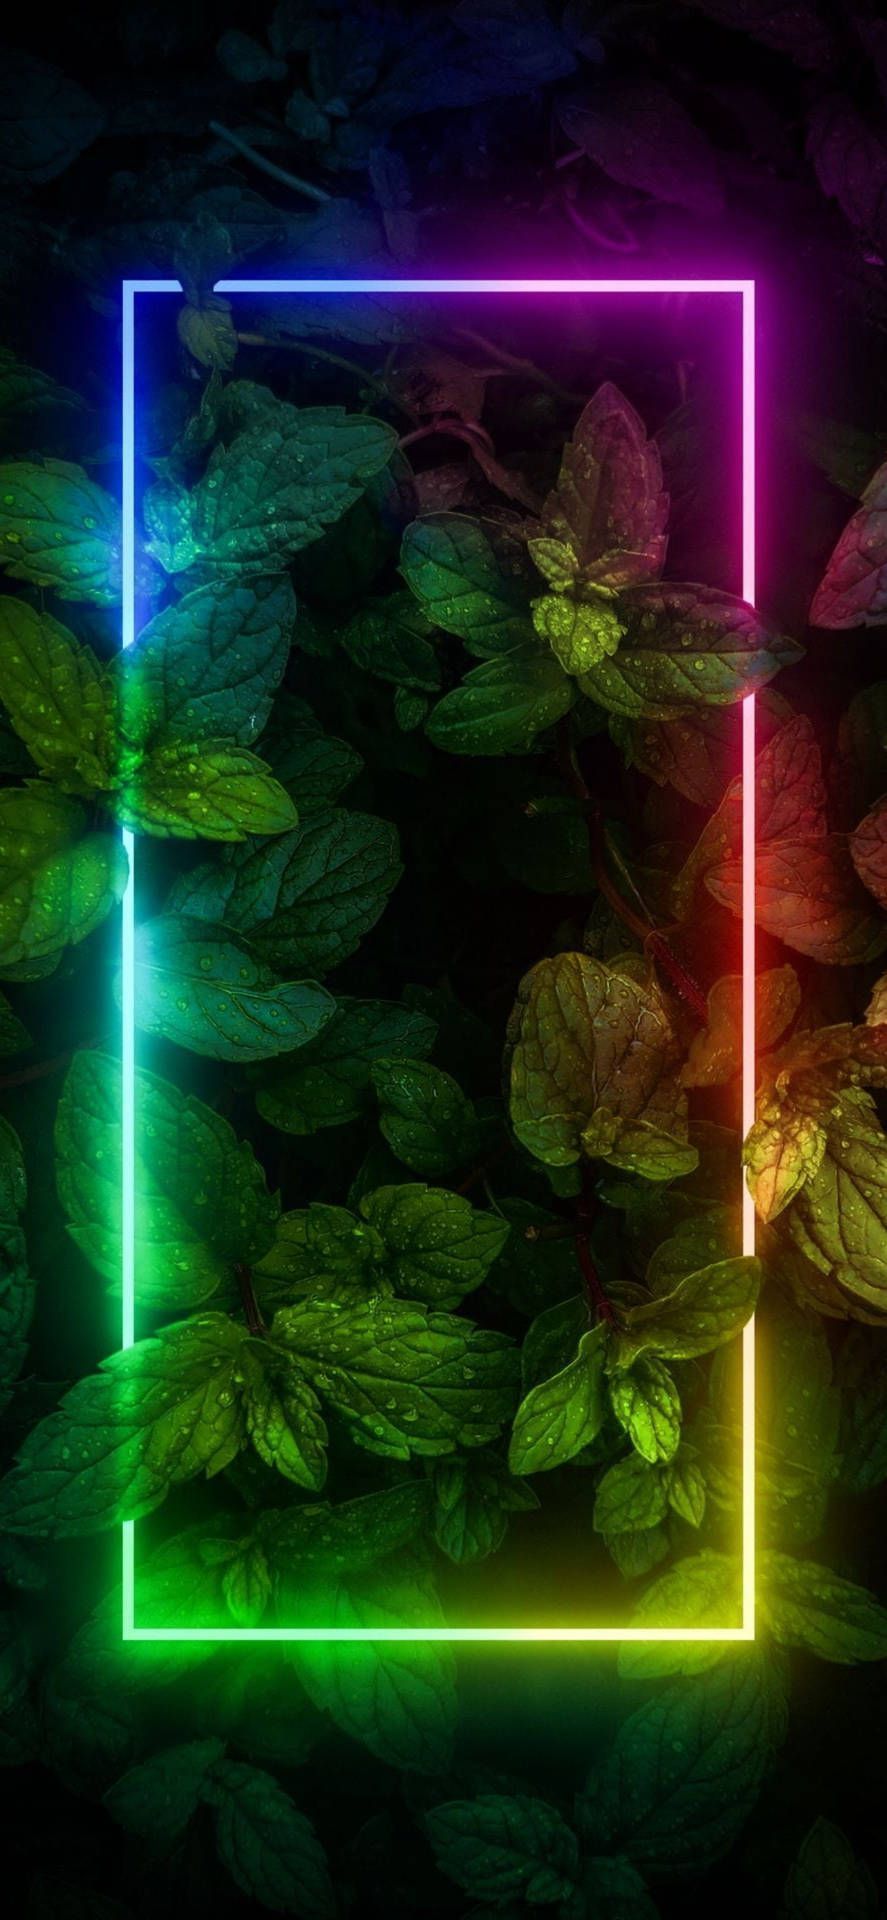 A neon frame in the leaves wallpaper 1080x2340 - Border